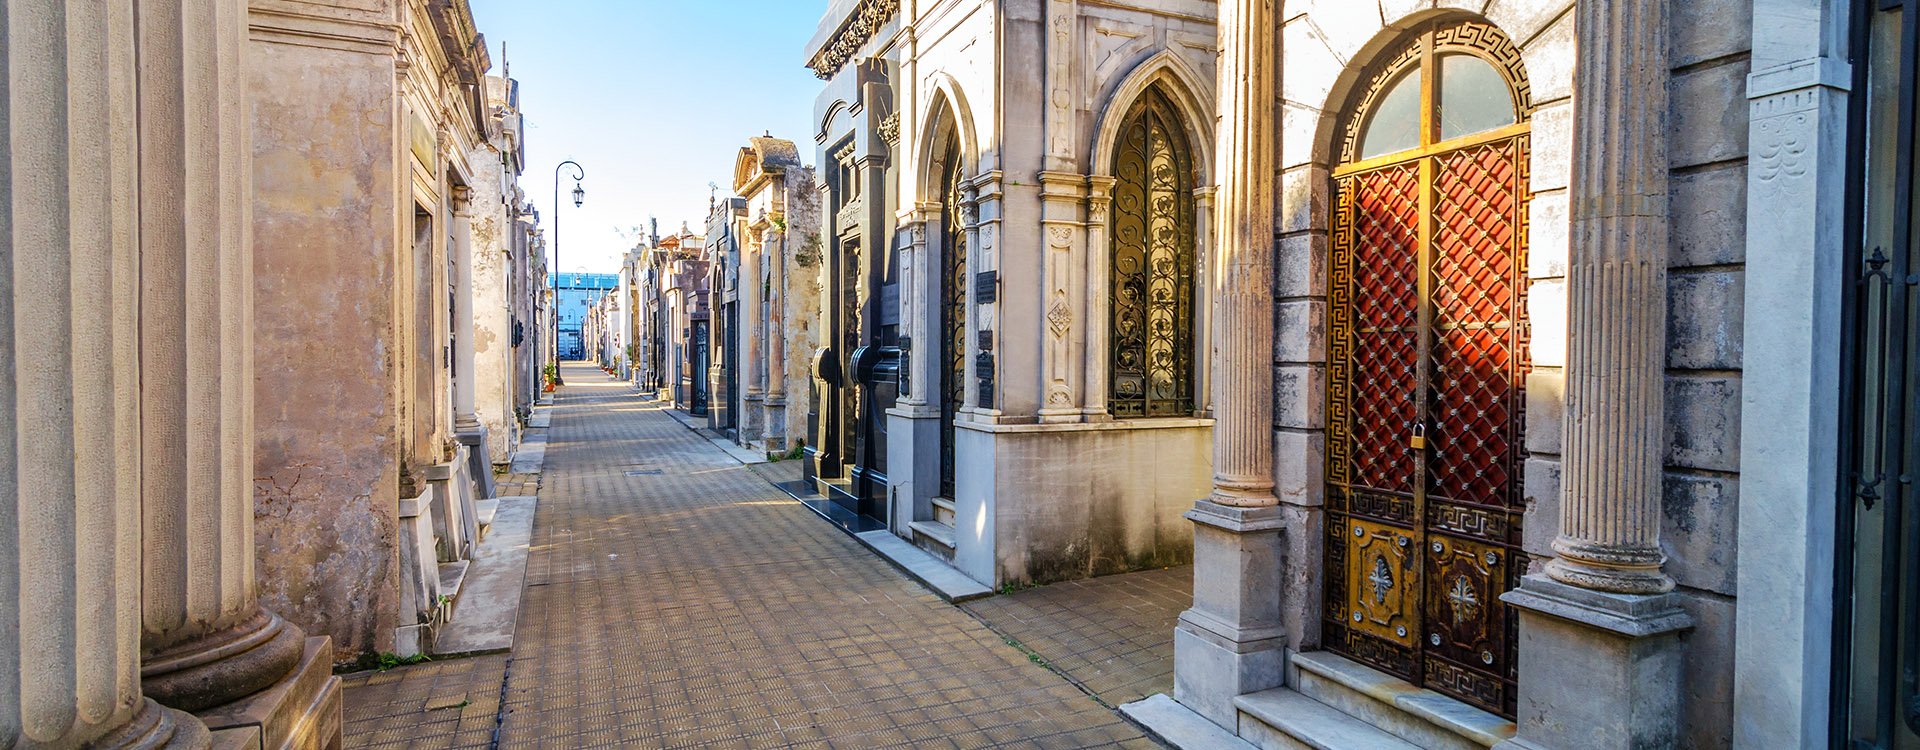 Recoleta Cemetery, the most important and famous cemetery in Argentina